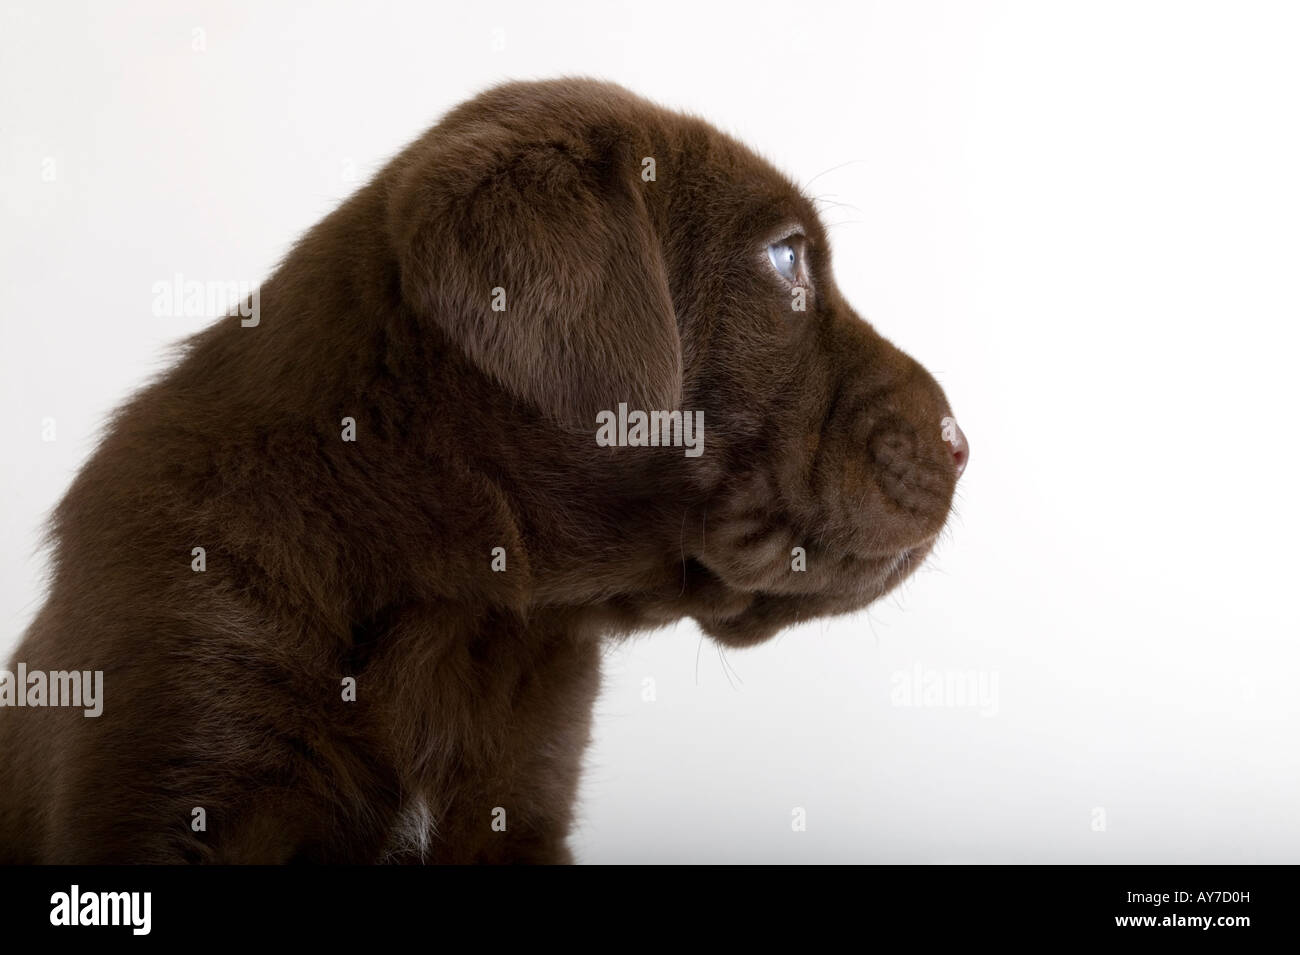 Chocolate Lab Shar Pei Mixed Breed Puppy In Studio White Background Stock Photo Alamy